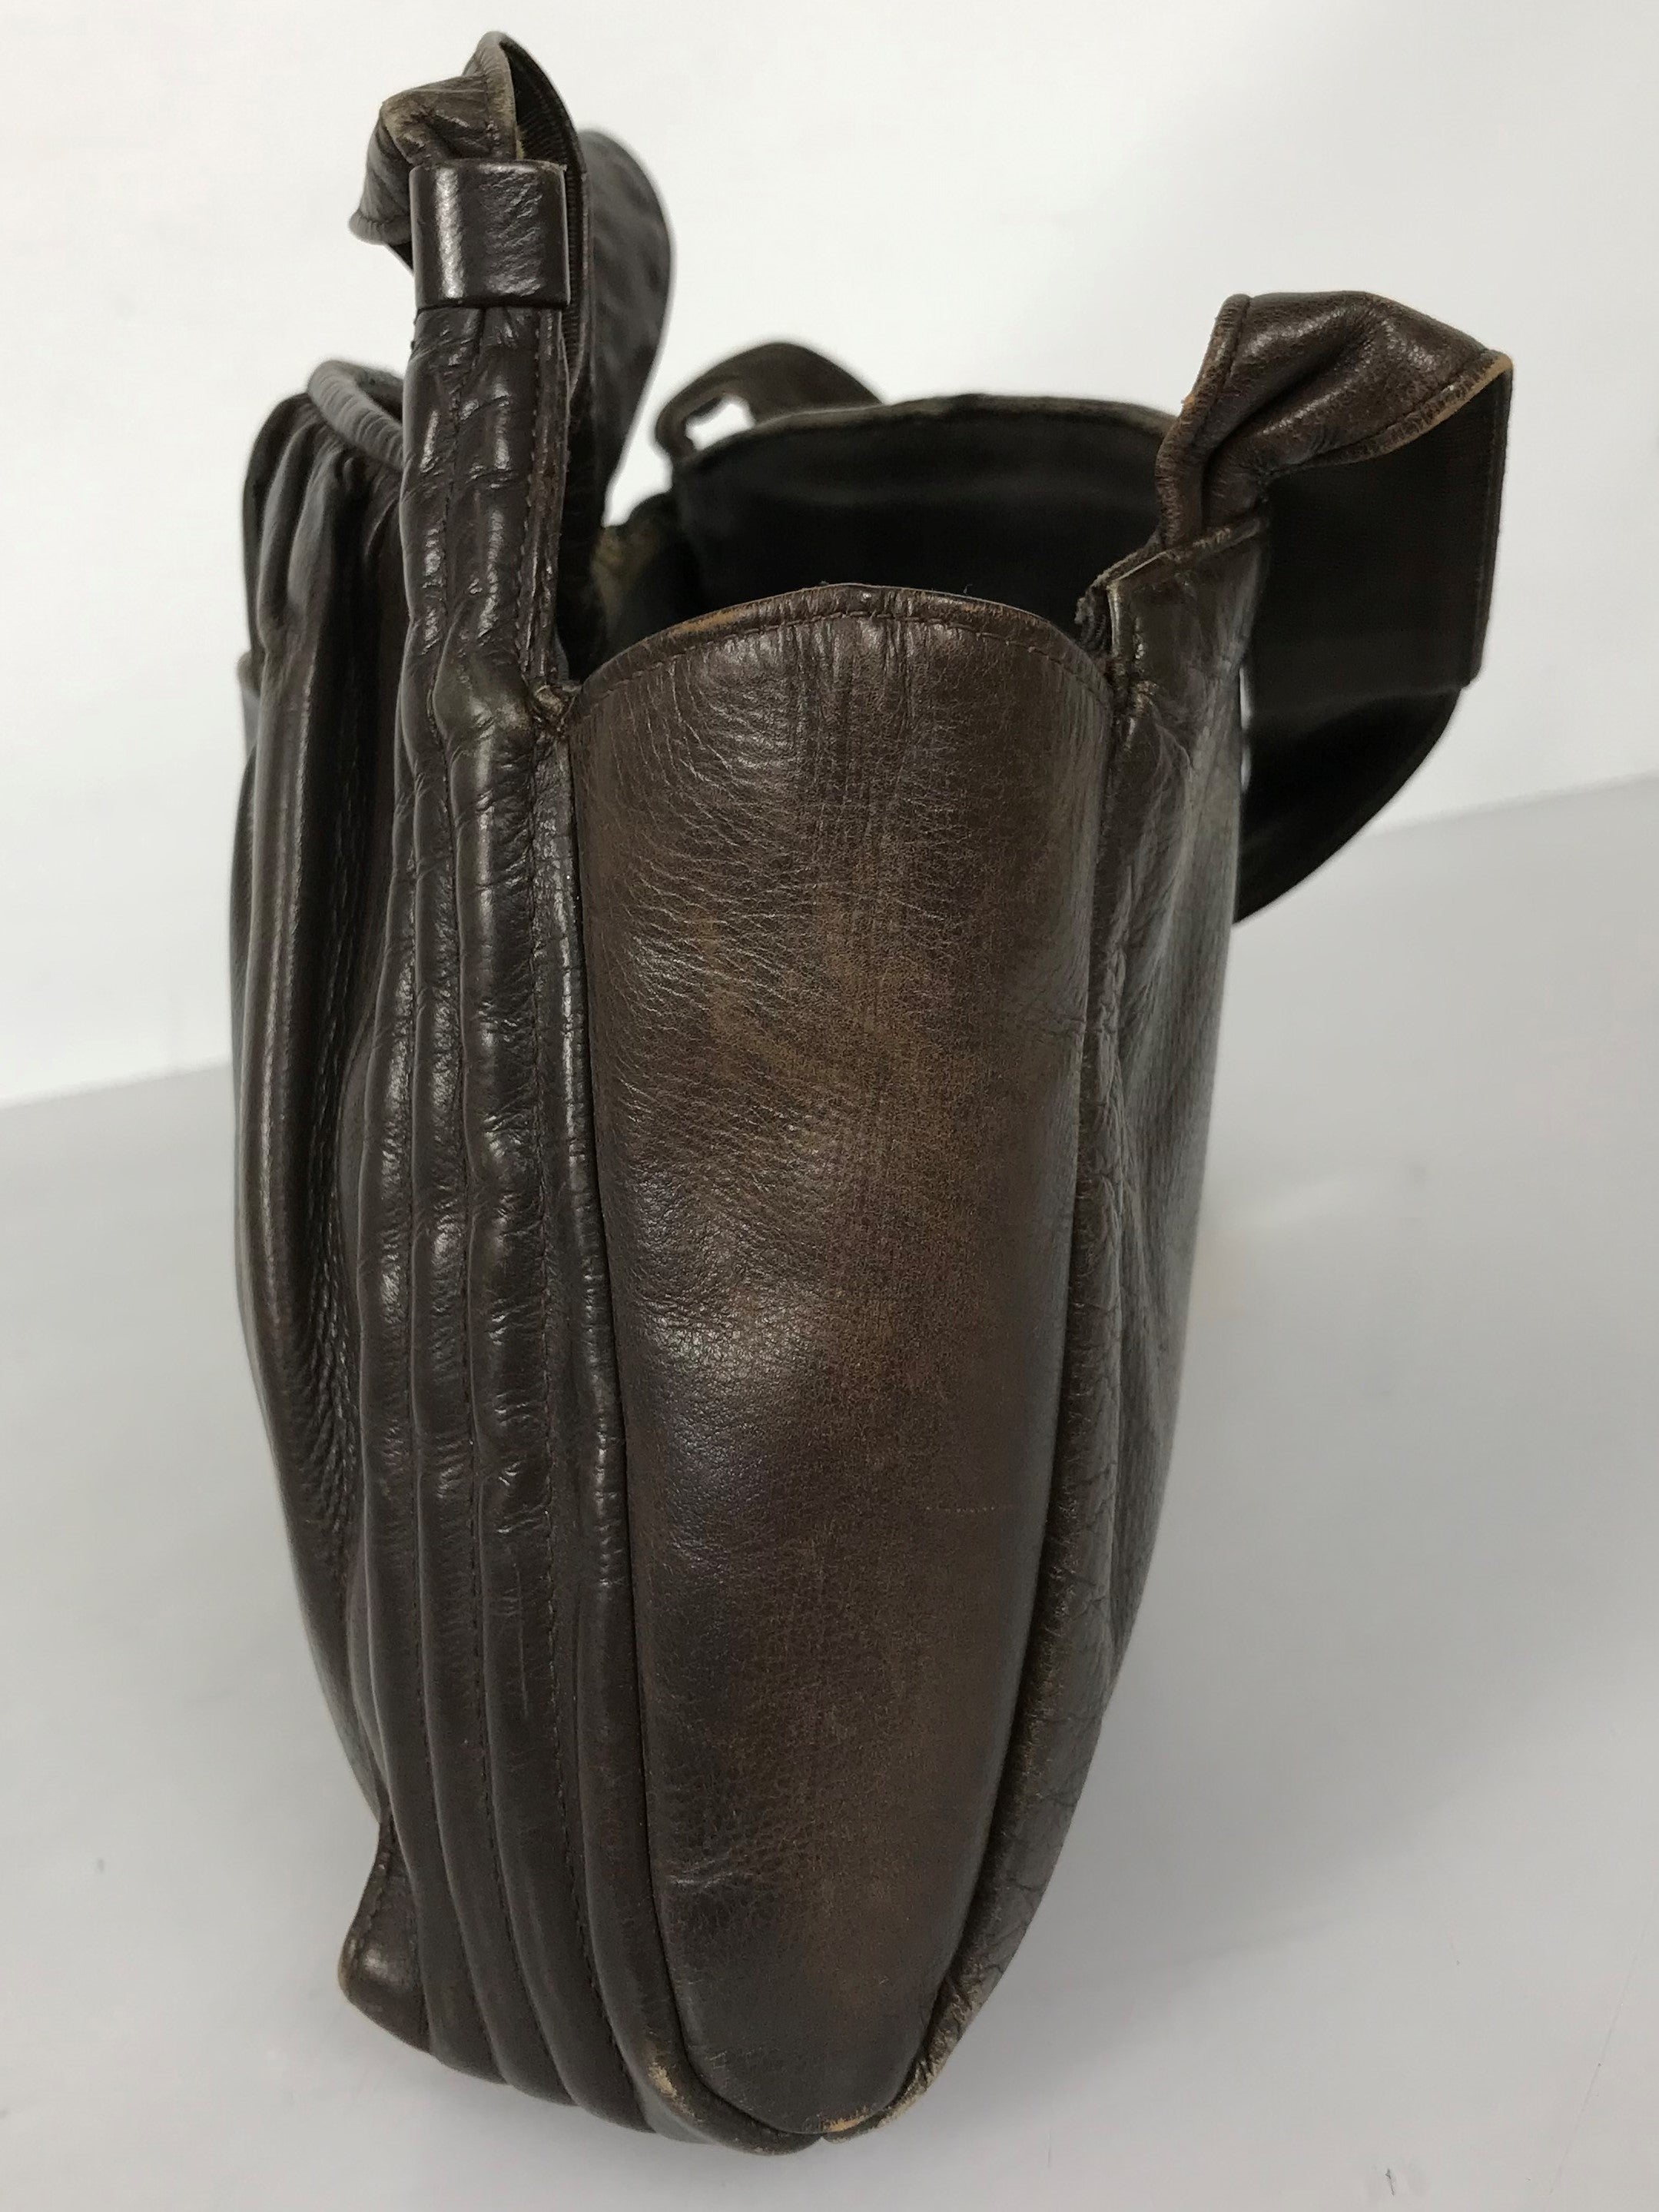 Vintage Leather 1940s Style Women's Evening Purse